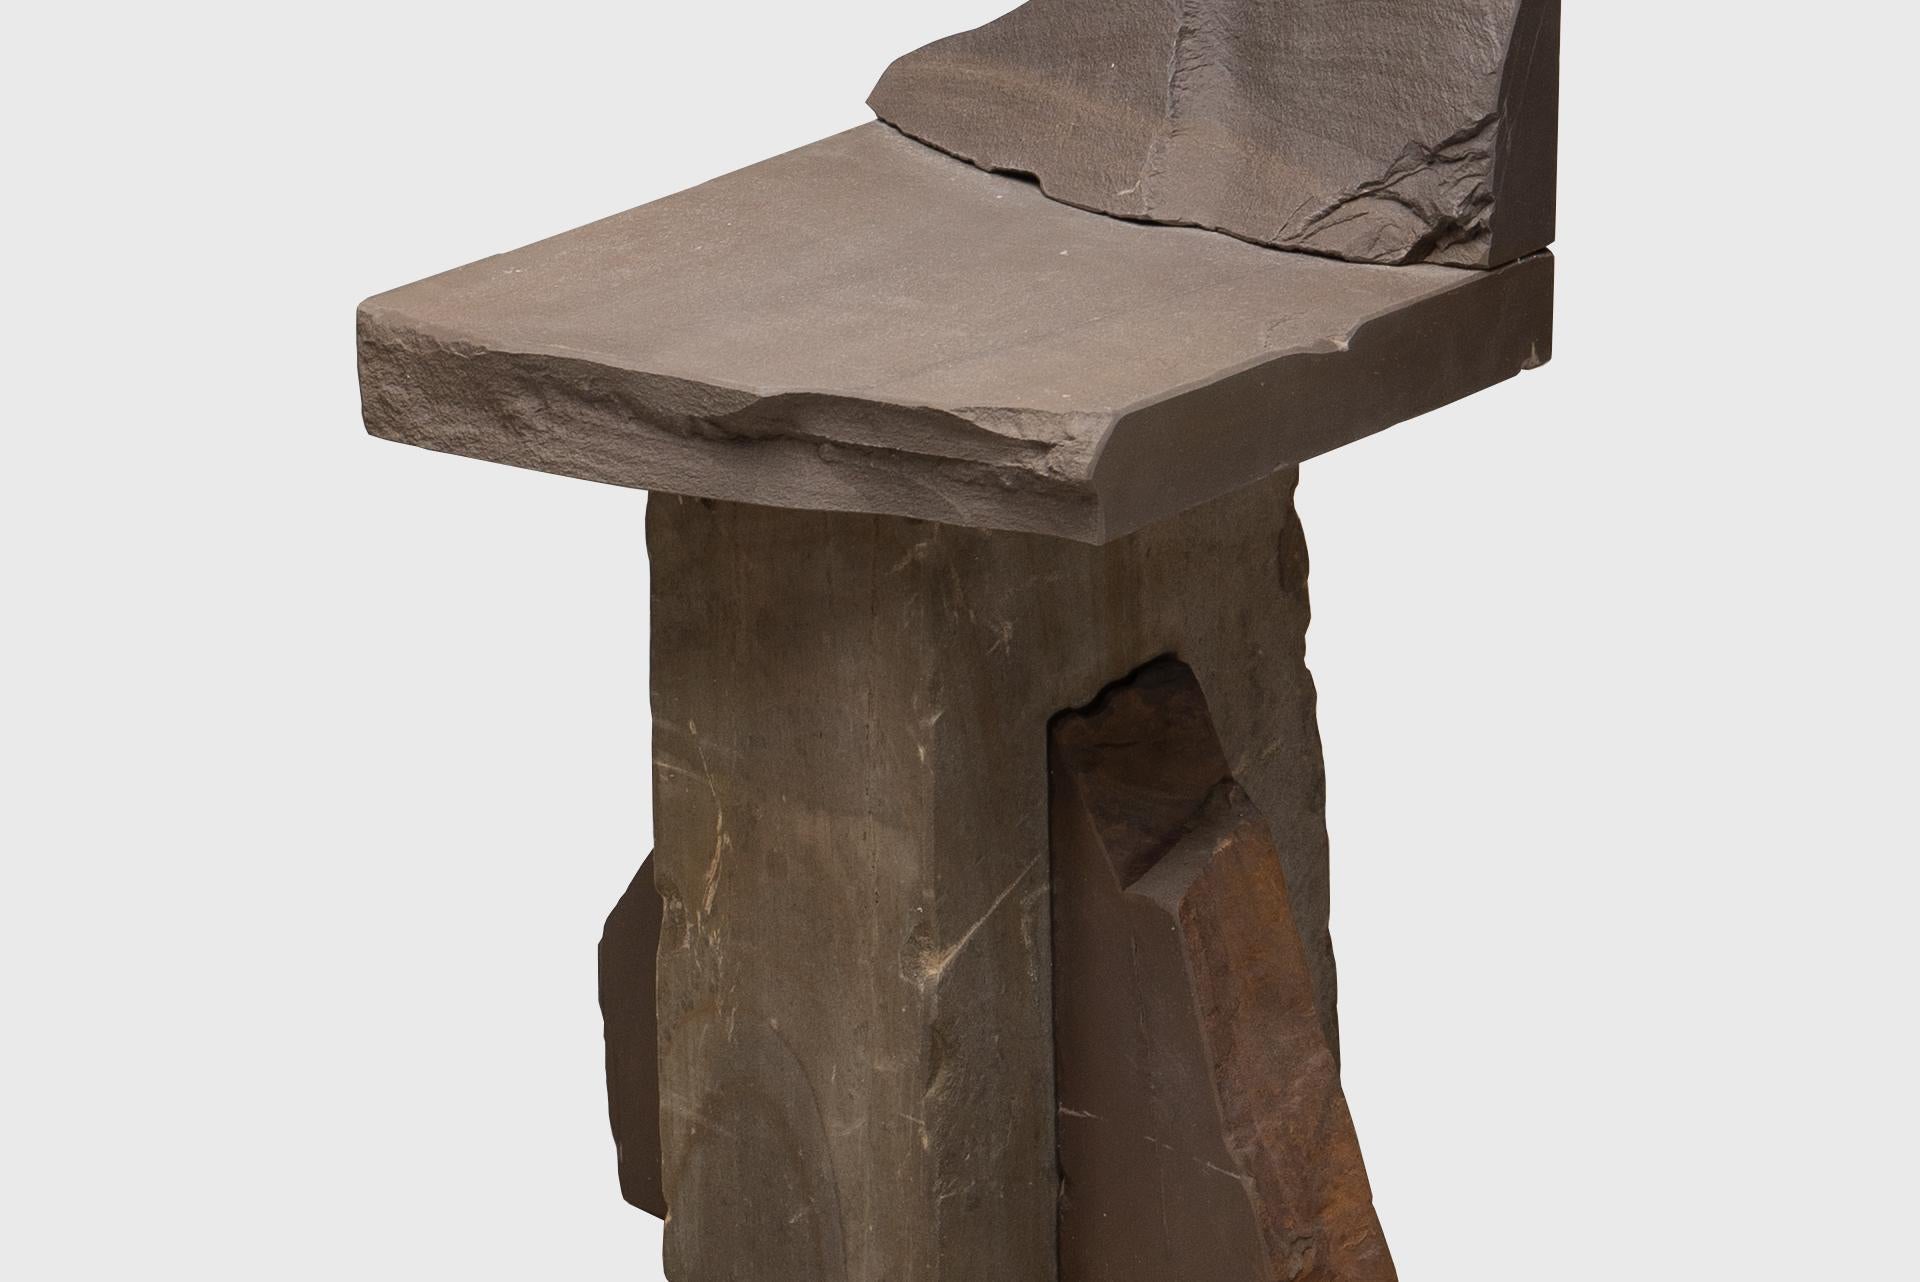 Contemporary Natural Chair 14, Graywacke Offcut Gray Stone, Carsten in der Elst For Sale 3